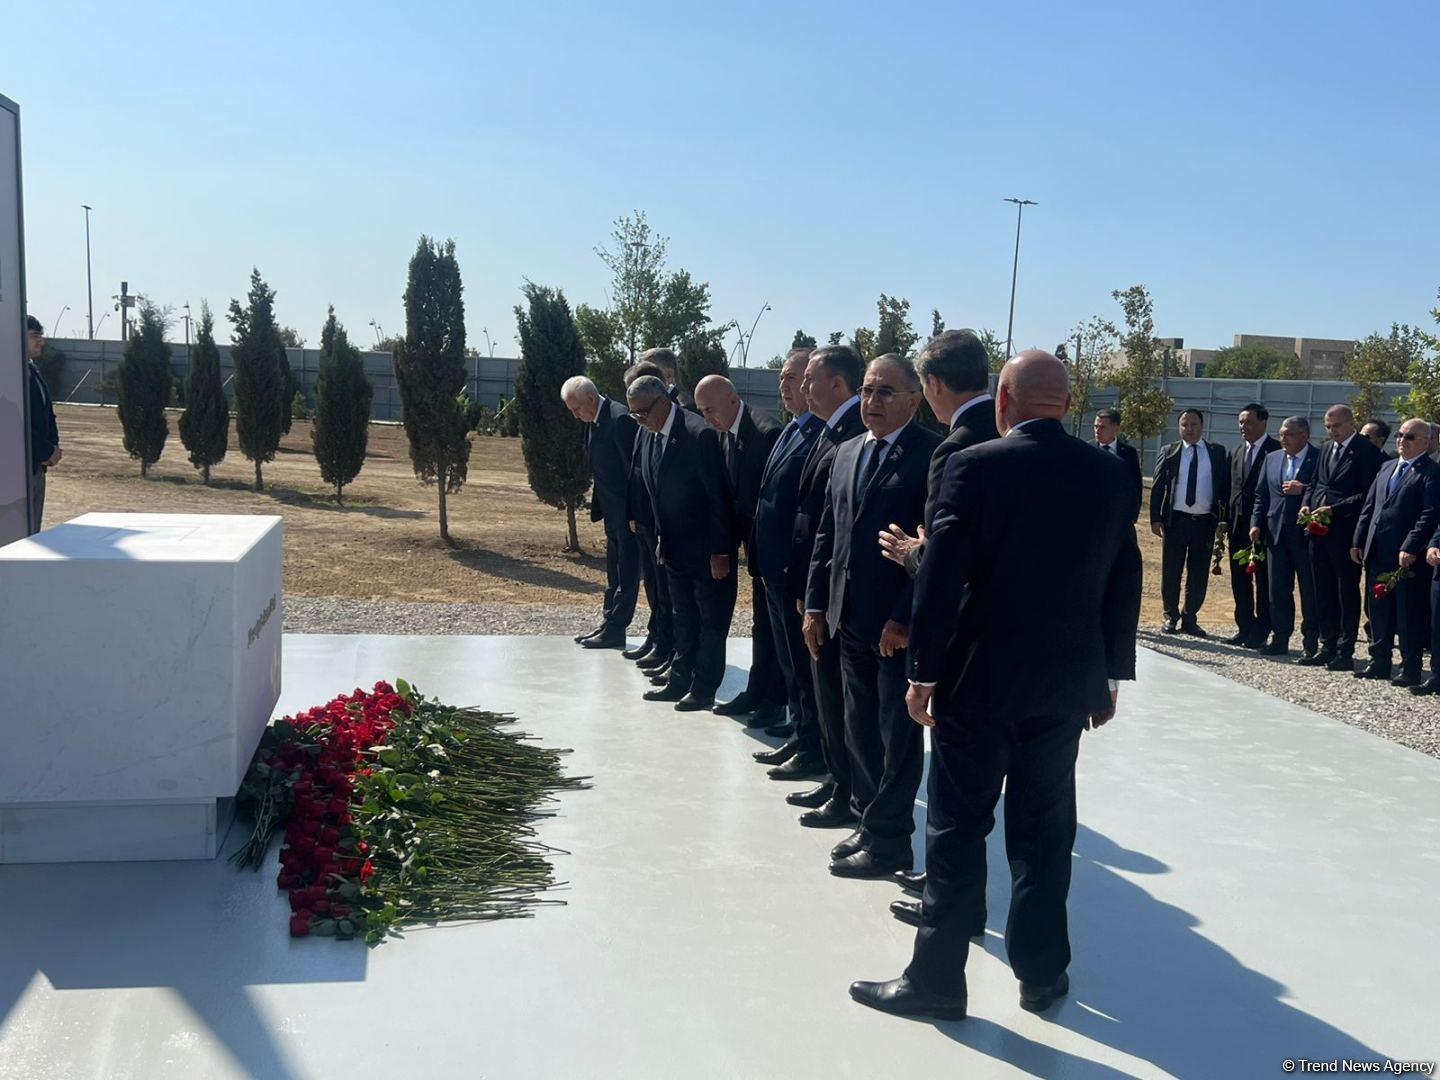 Mps, Other Azerbaijani Officials Visit Victory Park Under Construction In Baku (PHOTO/VIDEO)